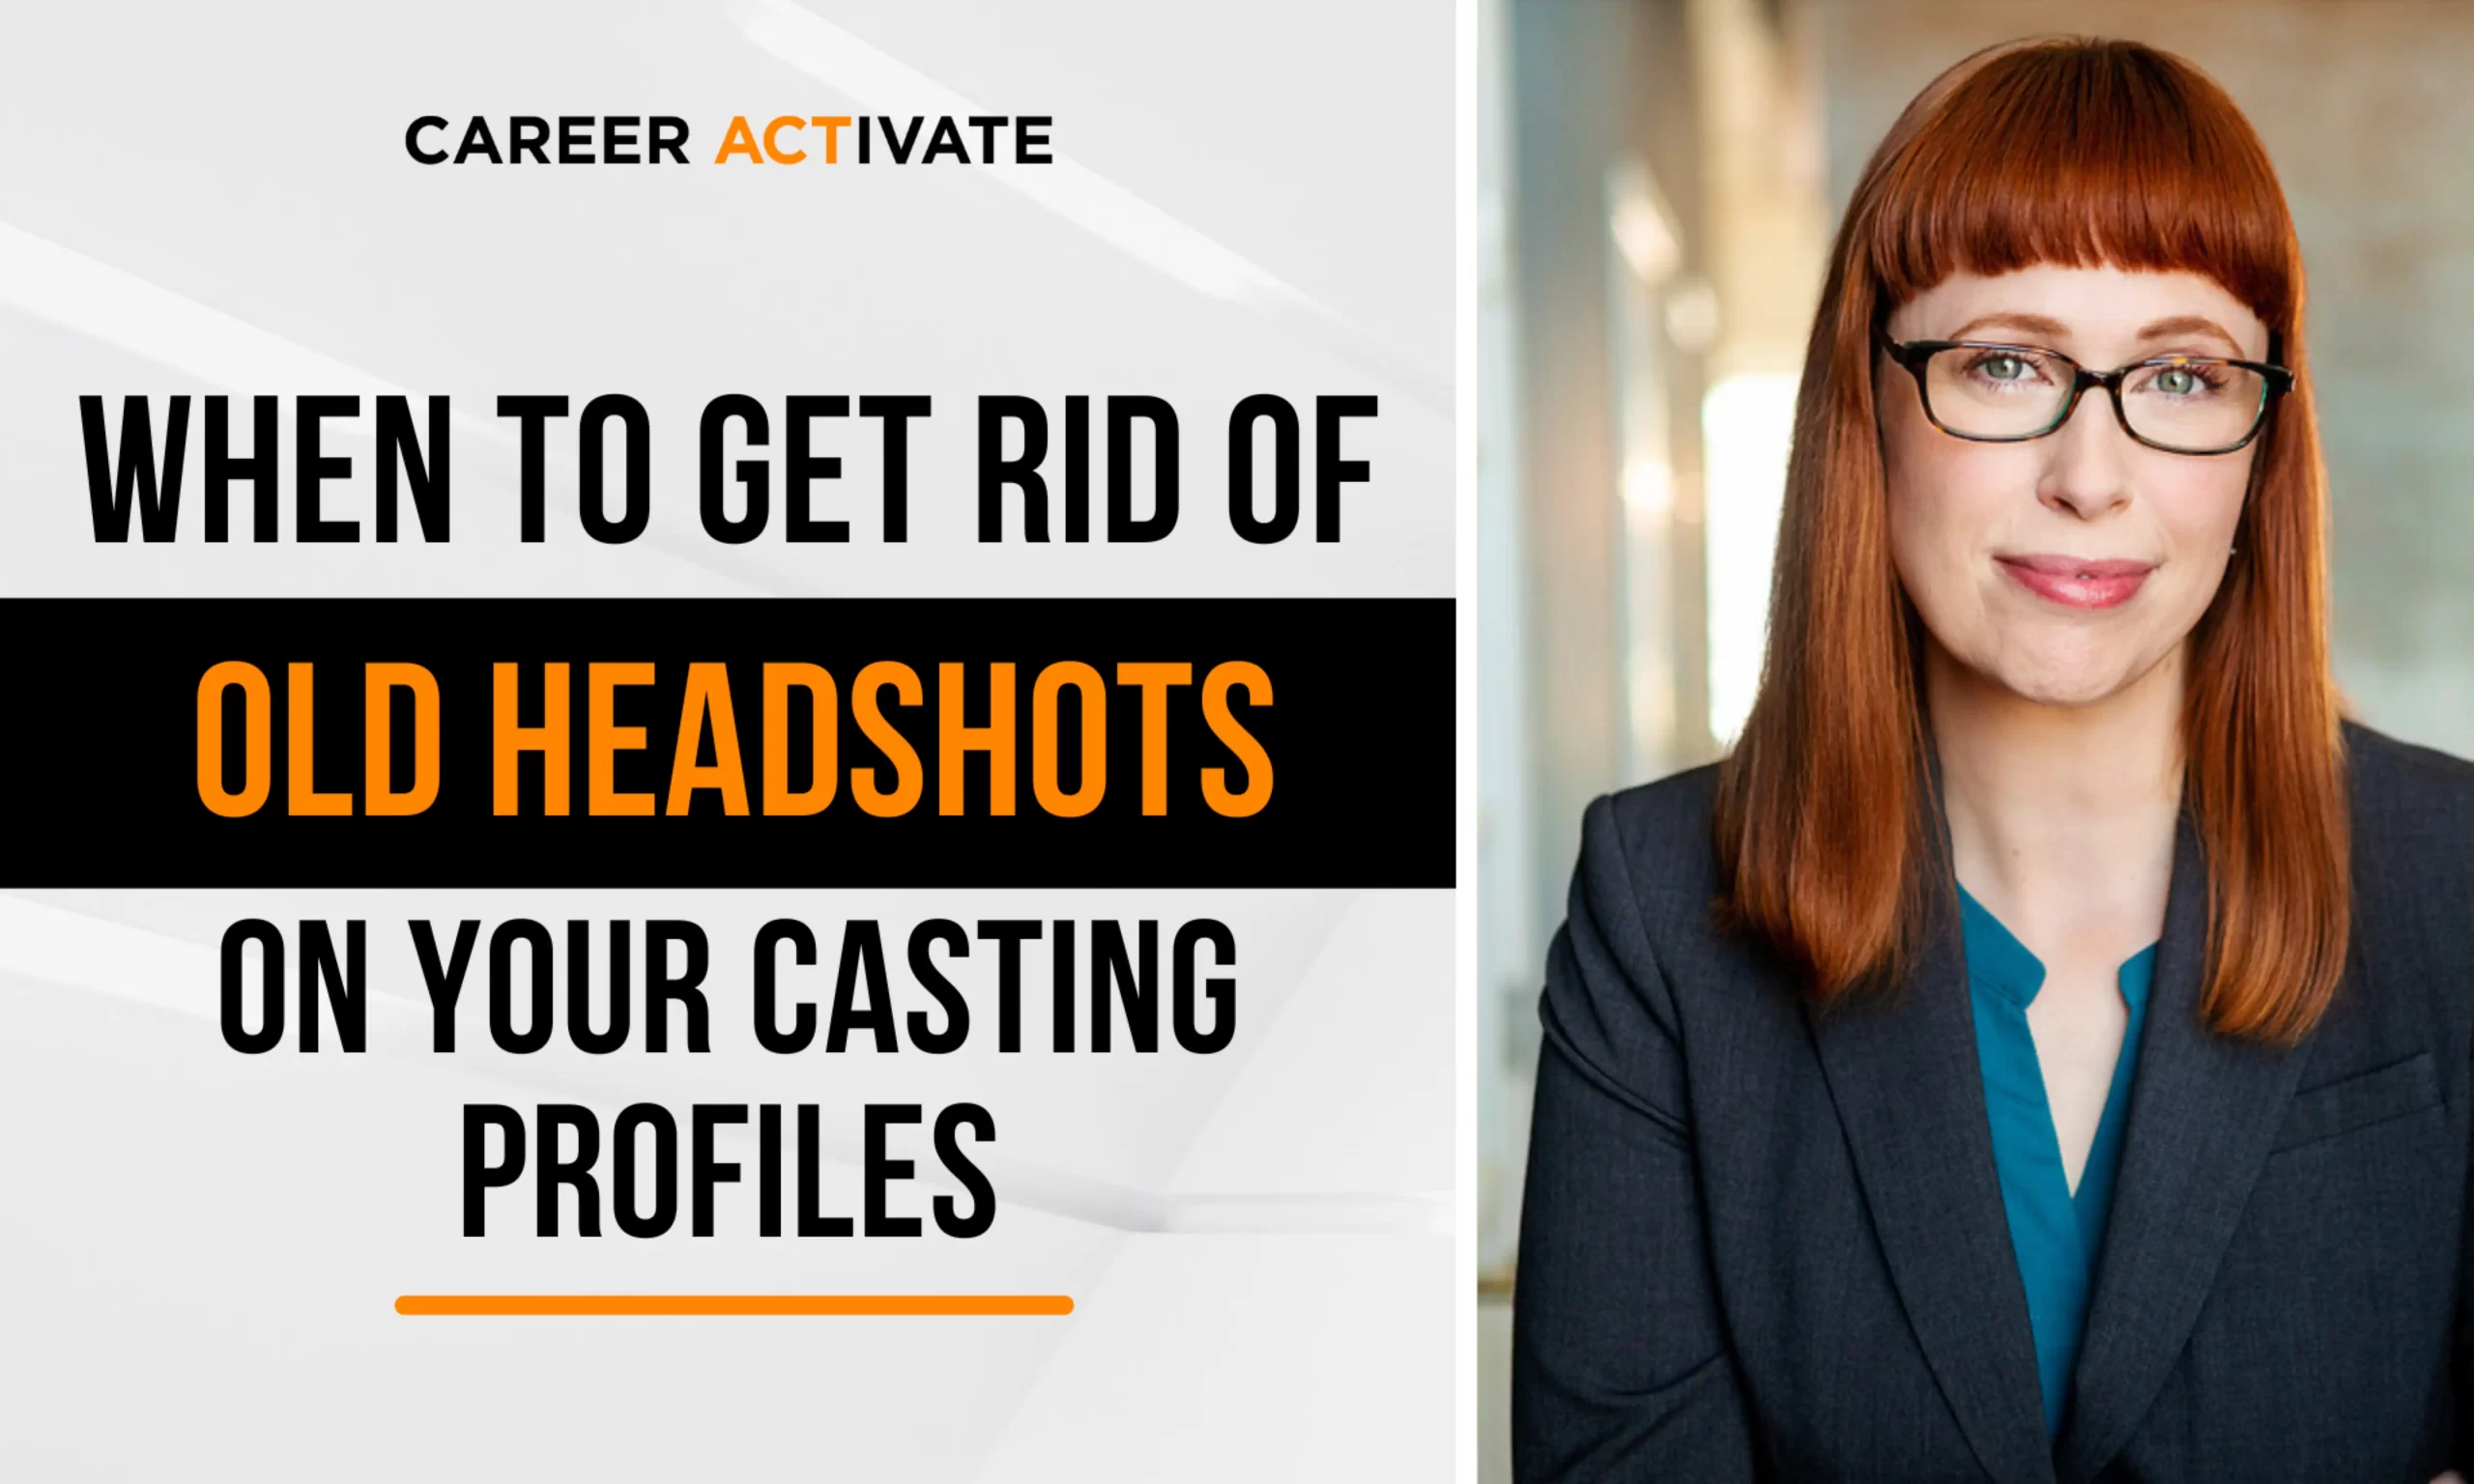 When To Get Rid of Old Headshots on Your Casting Profiles